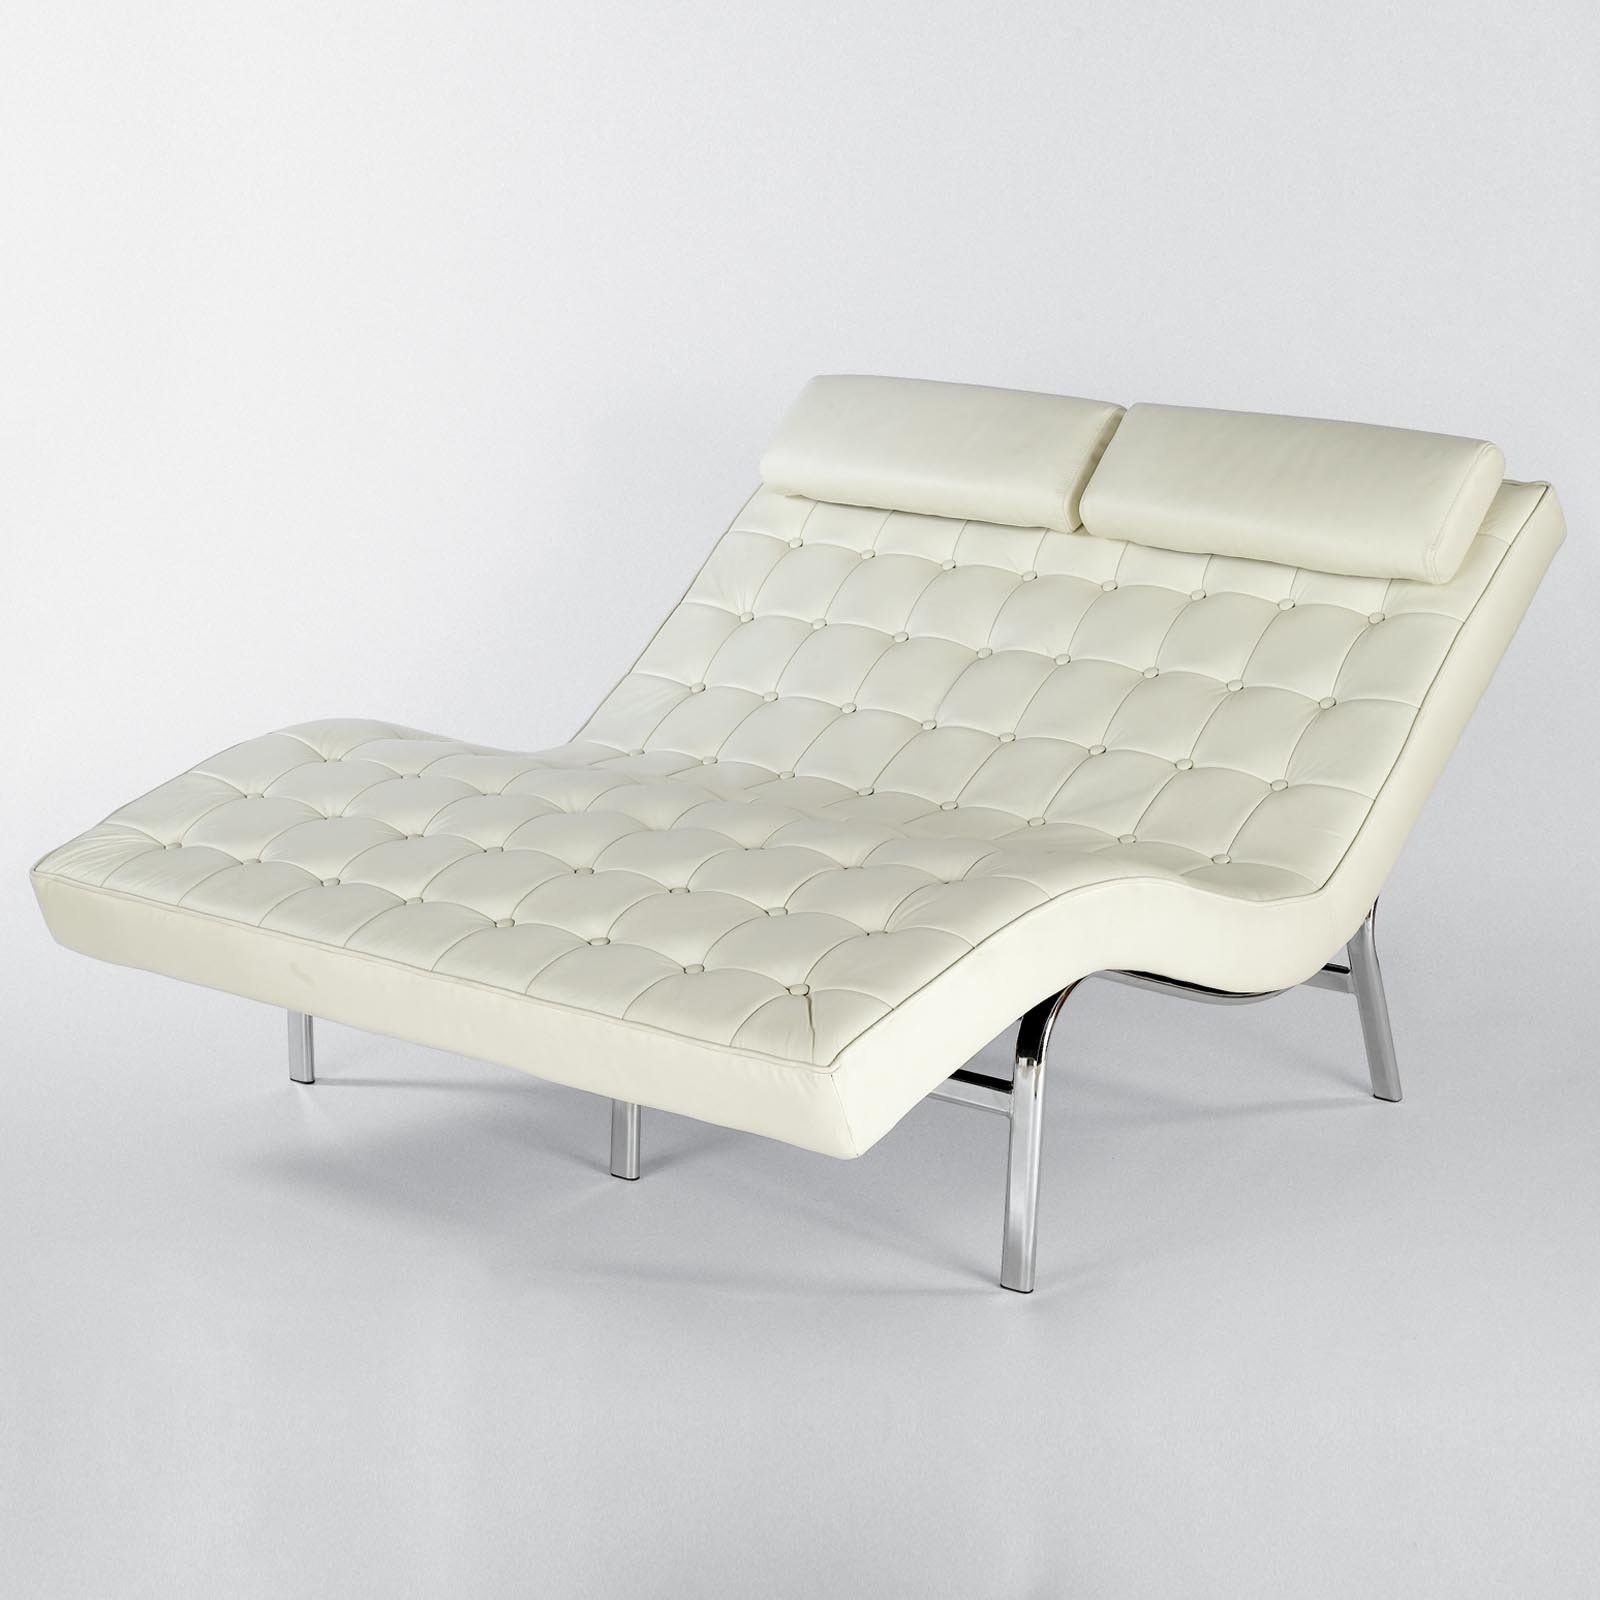 Trendy Valencia Double Chaise Lounge (View 11 of 15)